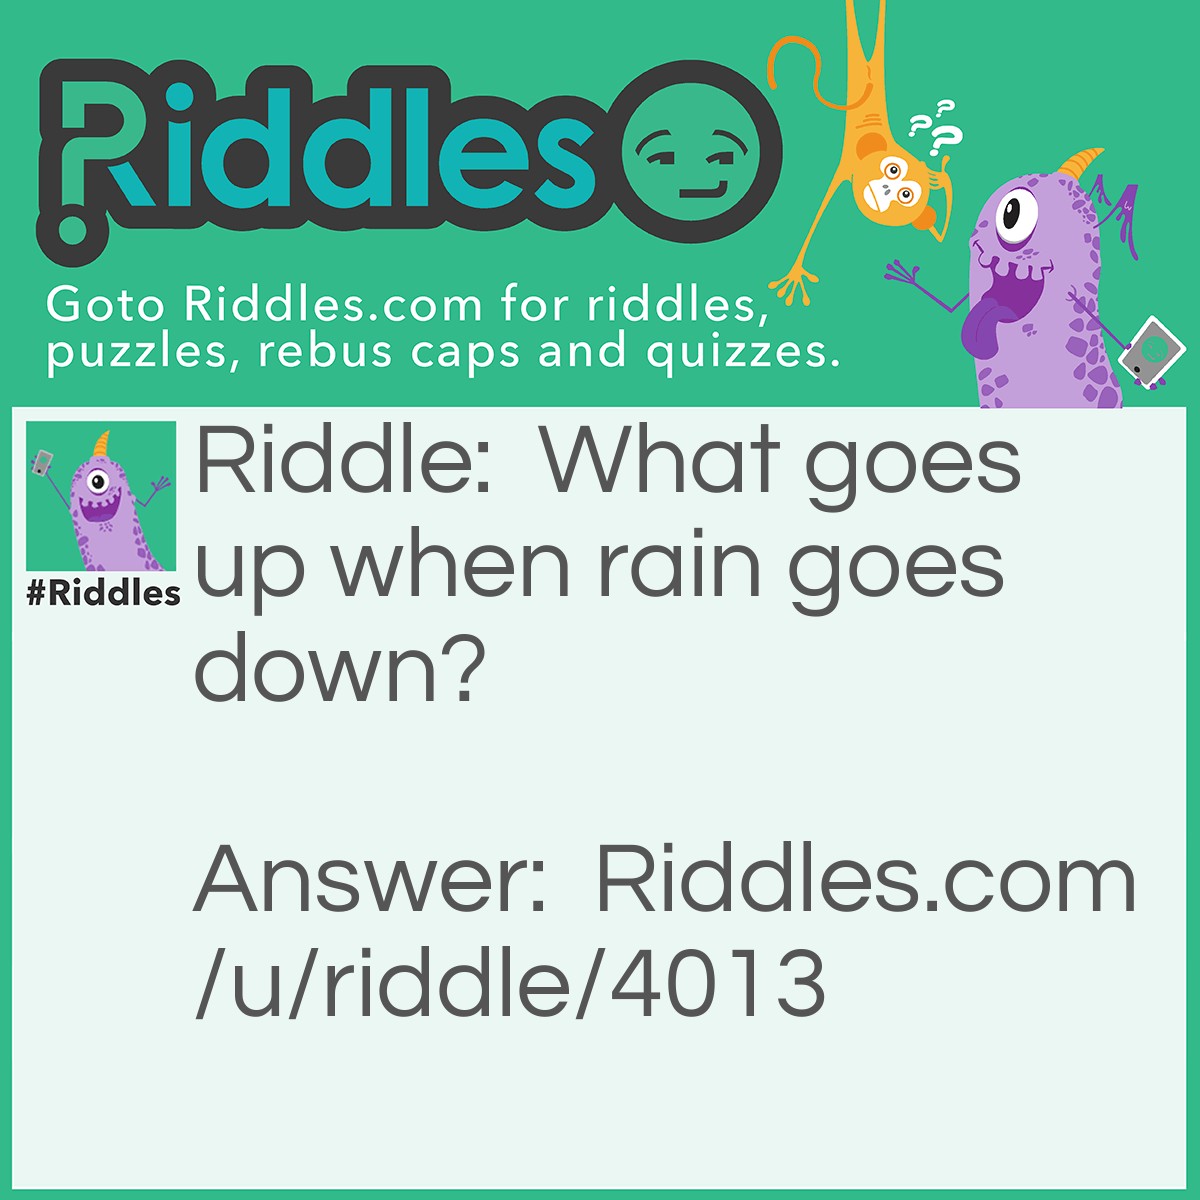 Riddle: What goes up when rain goes down? Answer: An umbrella!